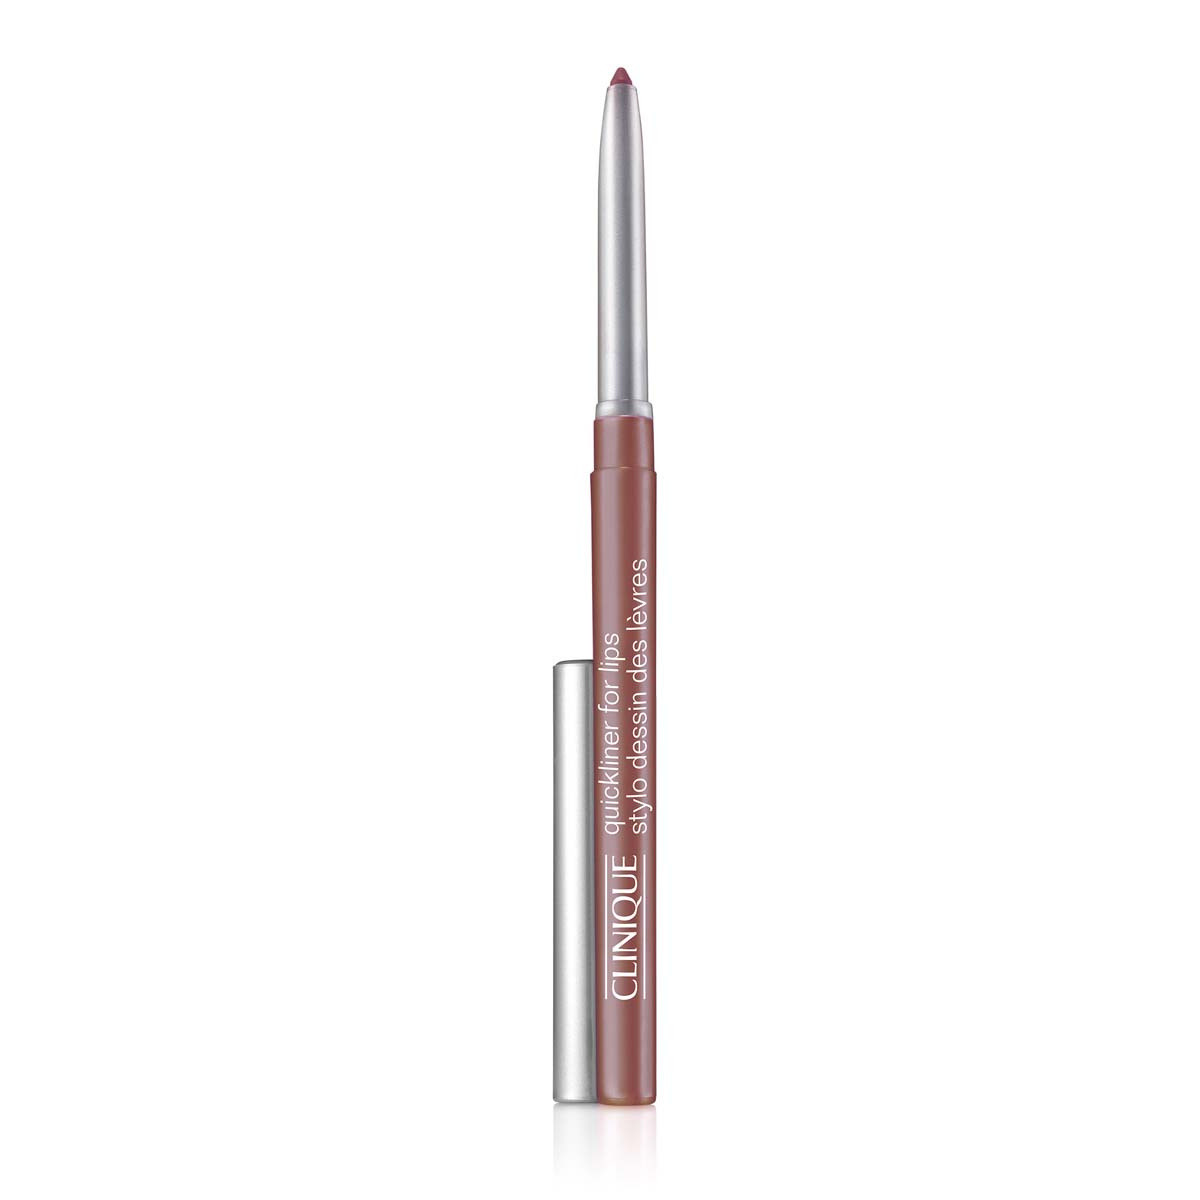 Clinique quicklinerTM for lips - 50 figgy    3 g, 50 FIGGY, large image number 0